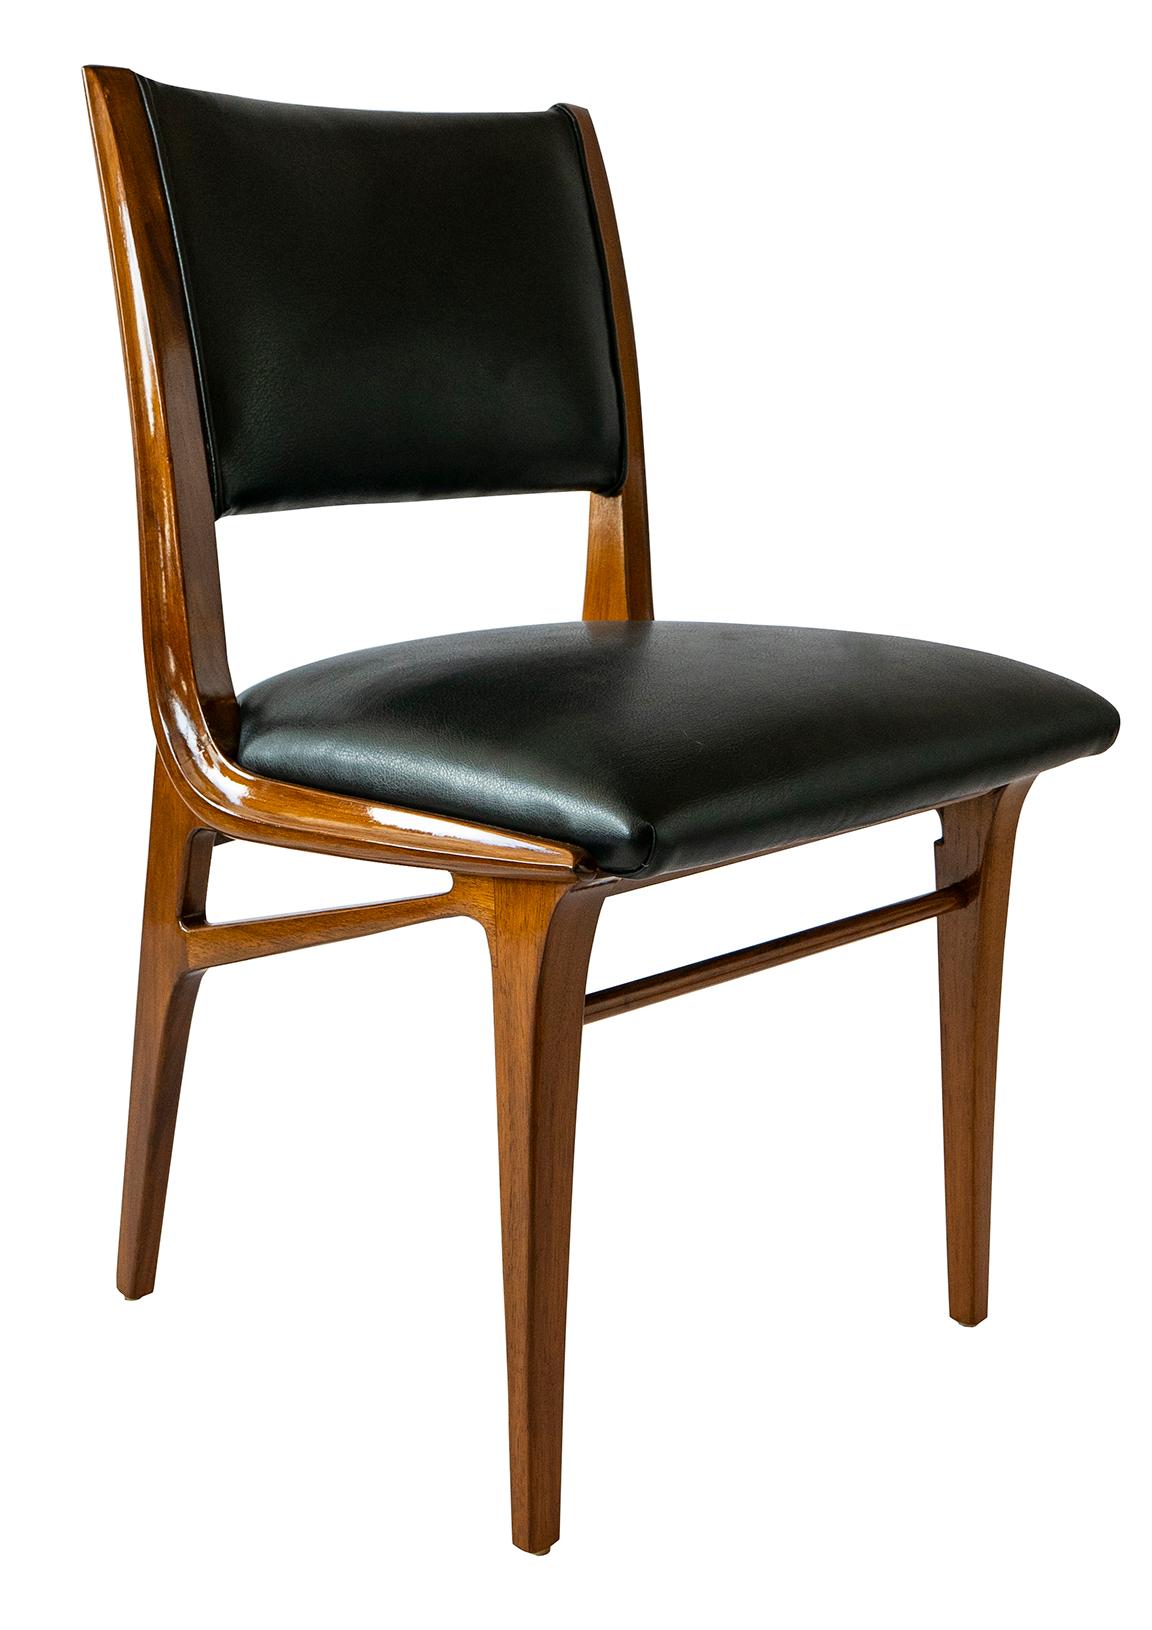 Set of 4 Italian modern walnut side/dining chairs- related examples in de guttry il mobile d'italiano degli anni 50 e 60 - excellent restored condition- newly upholstered.
  